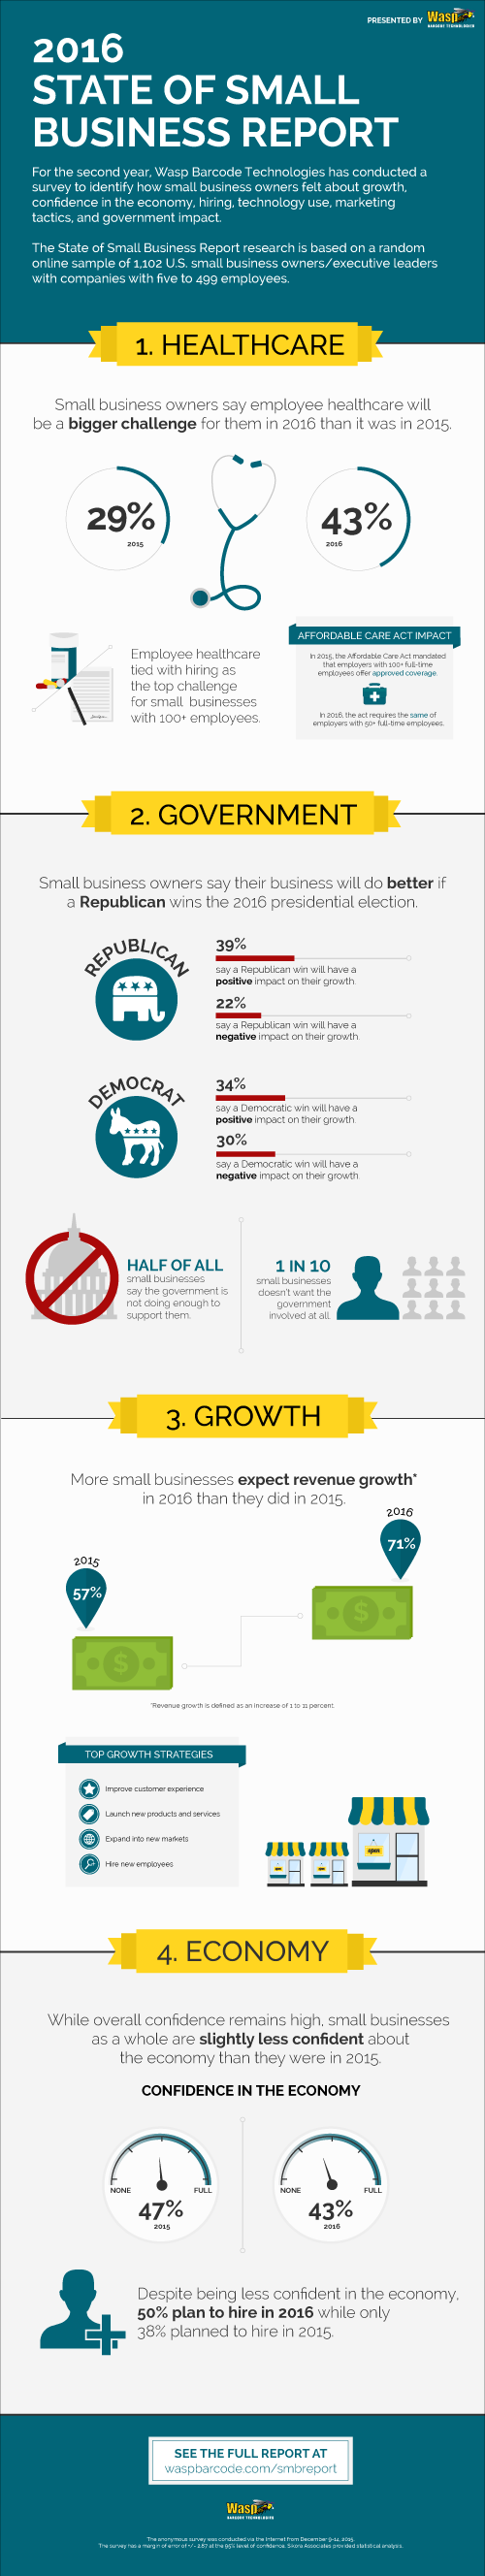 2016 State of Small Business Report